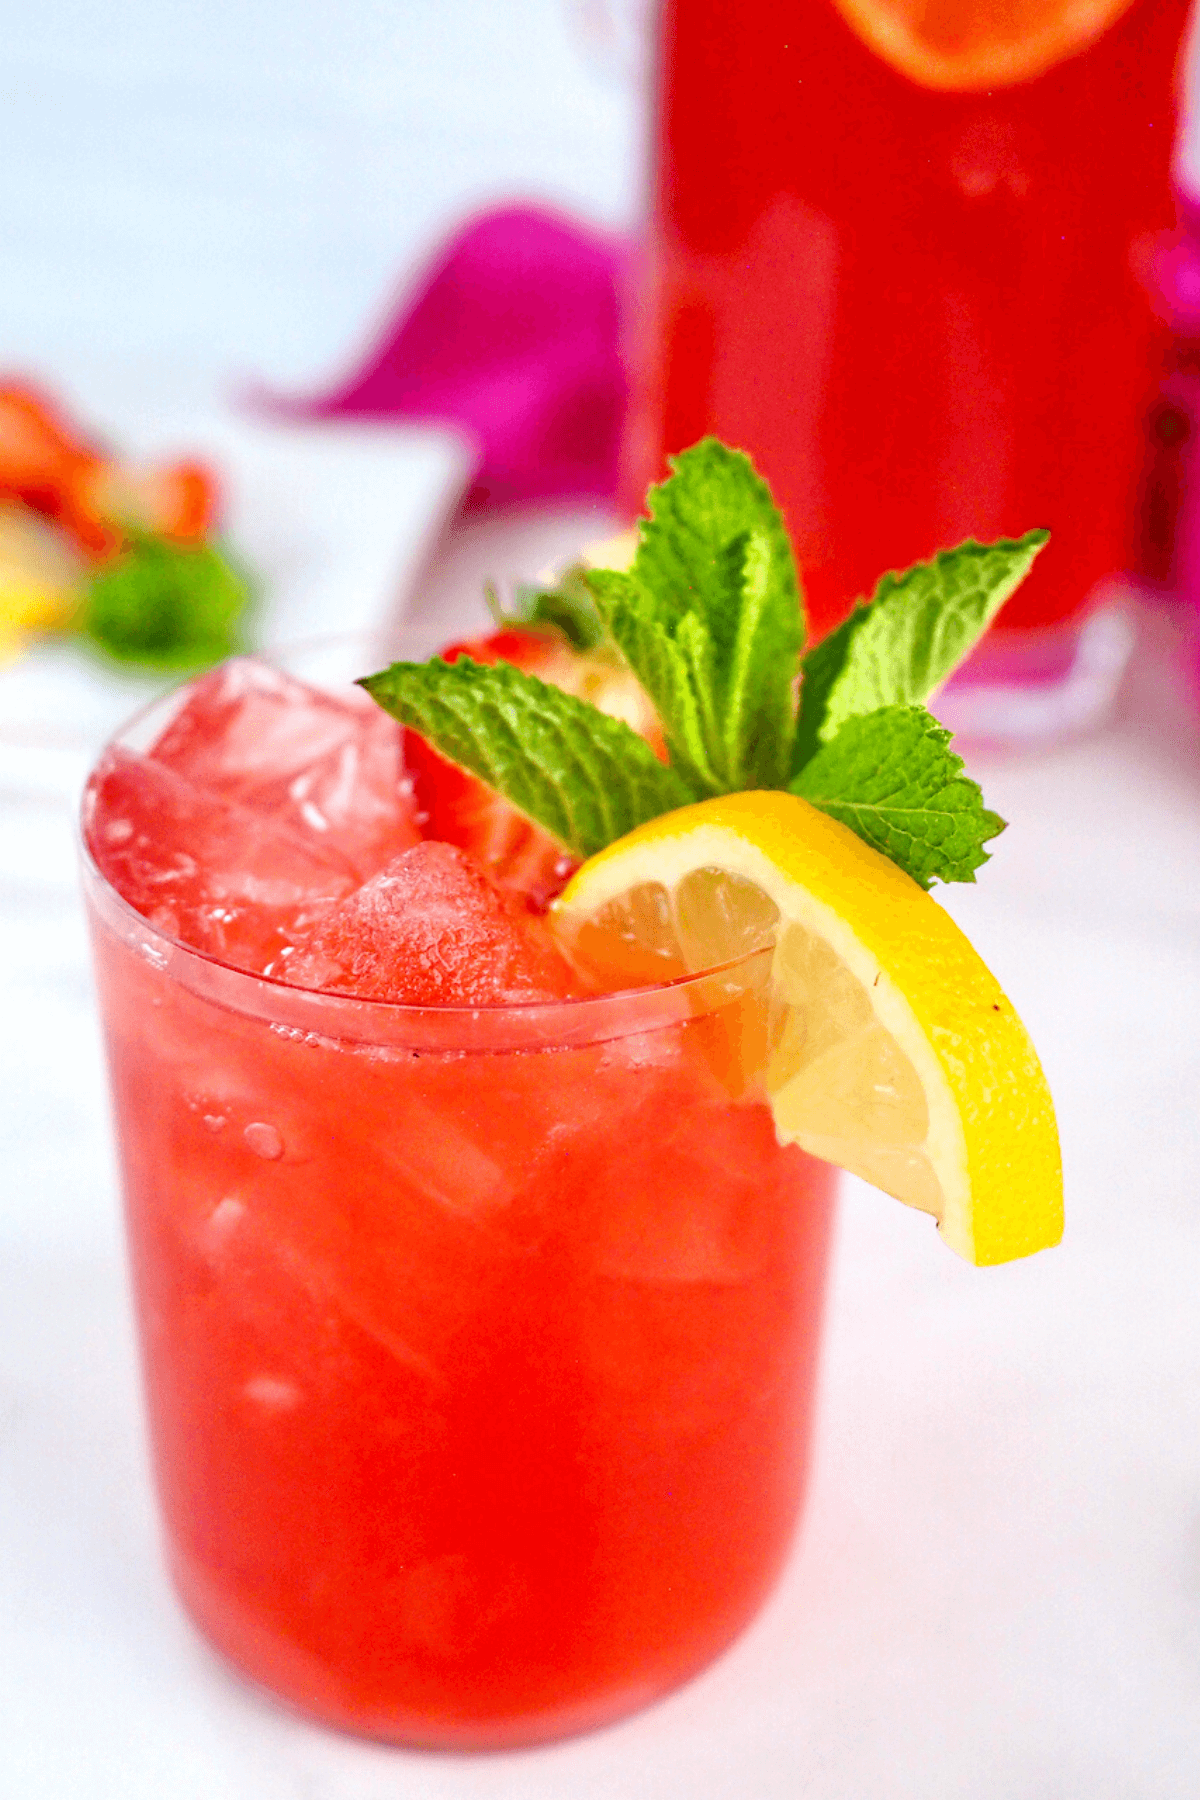 Glass filled with bright pink lemonade drink with vodka.